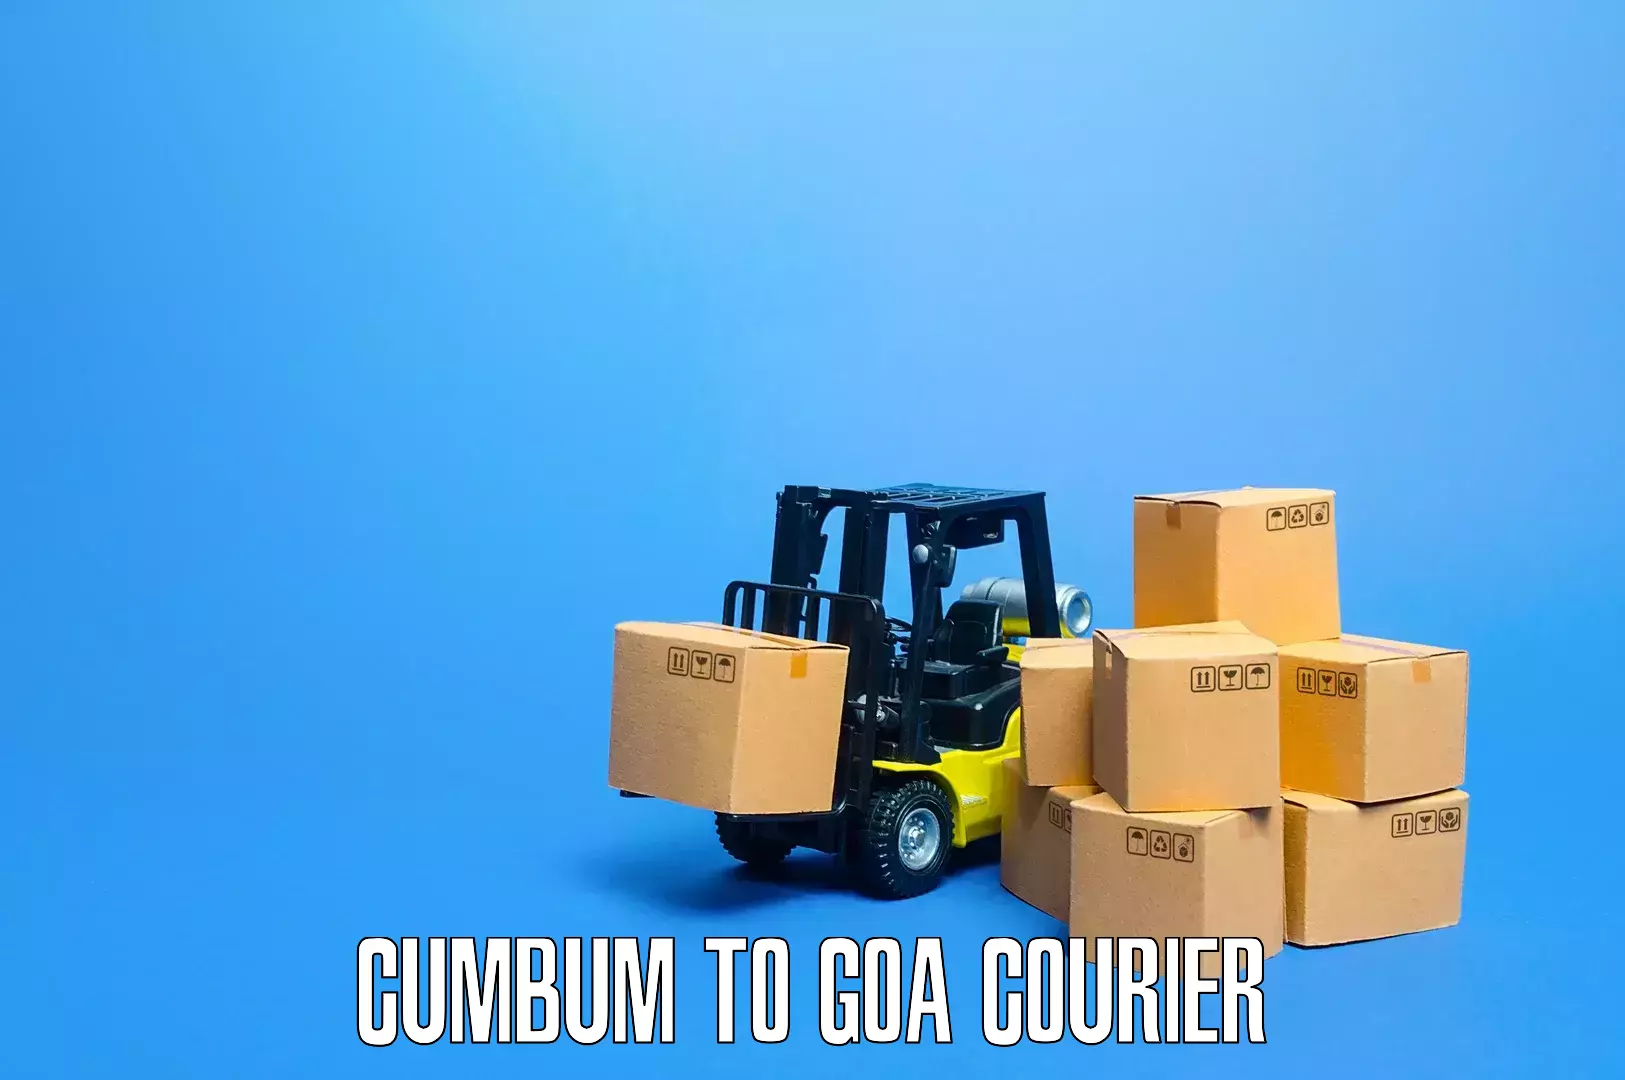 Specialized household transport Cumbum to Goa